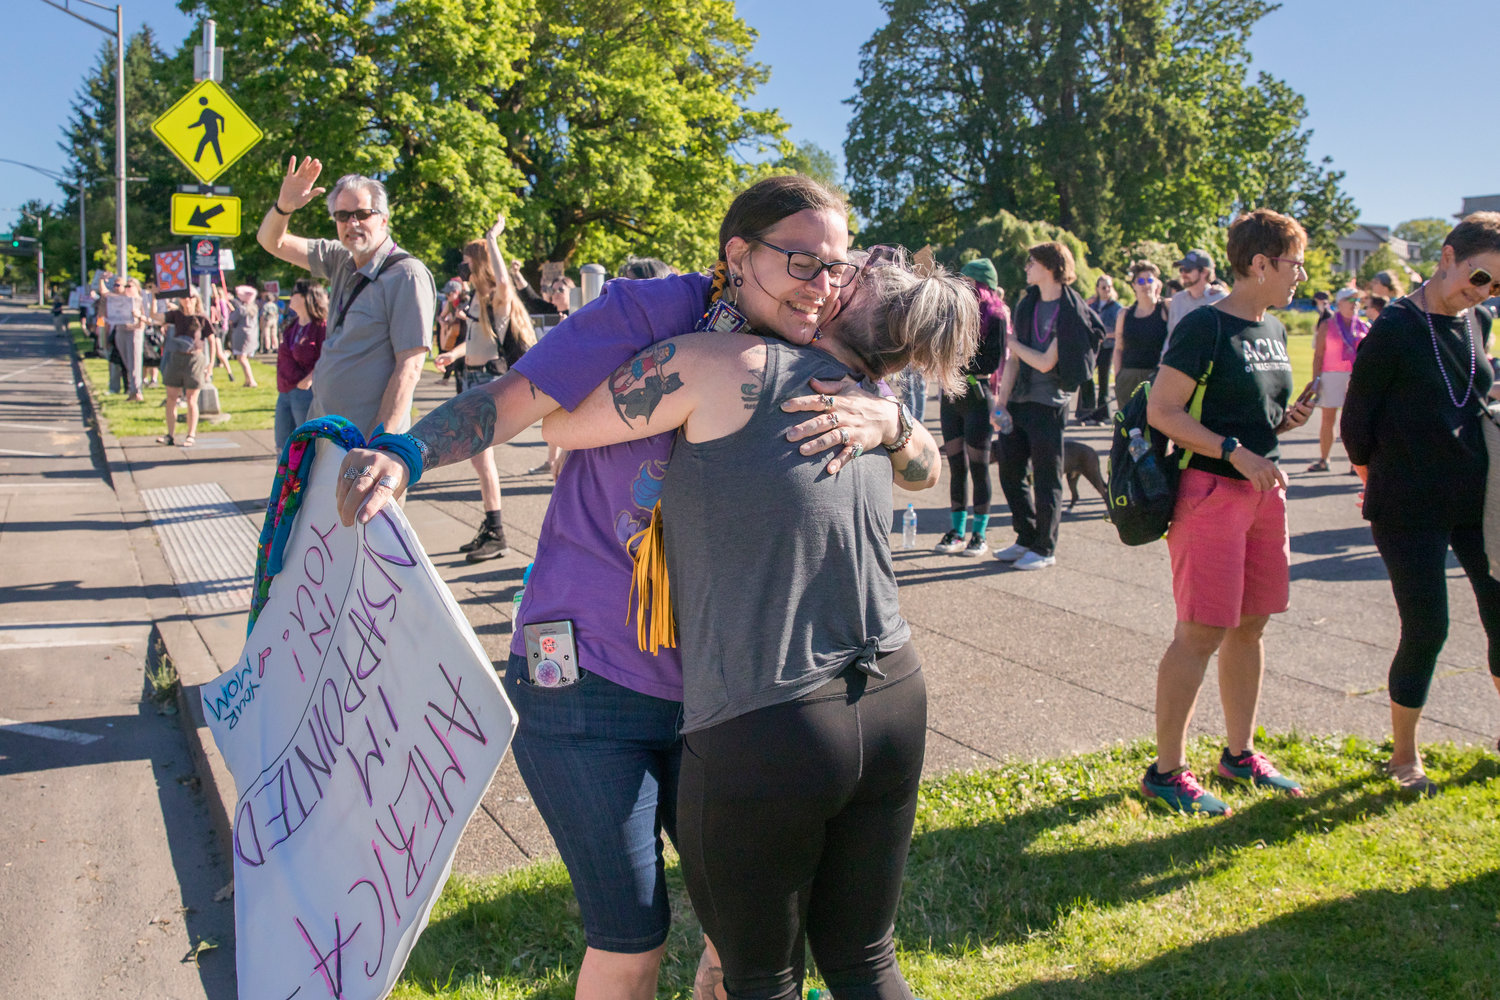 Attendees embrace at a rally in support of abortion rights Friday afternoon in Olympia.